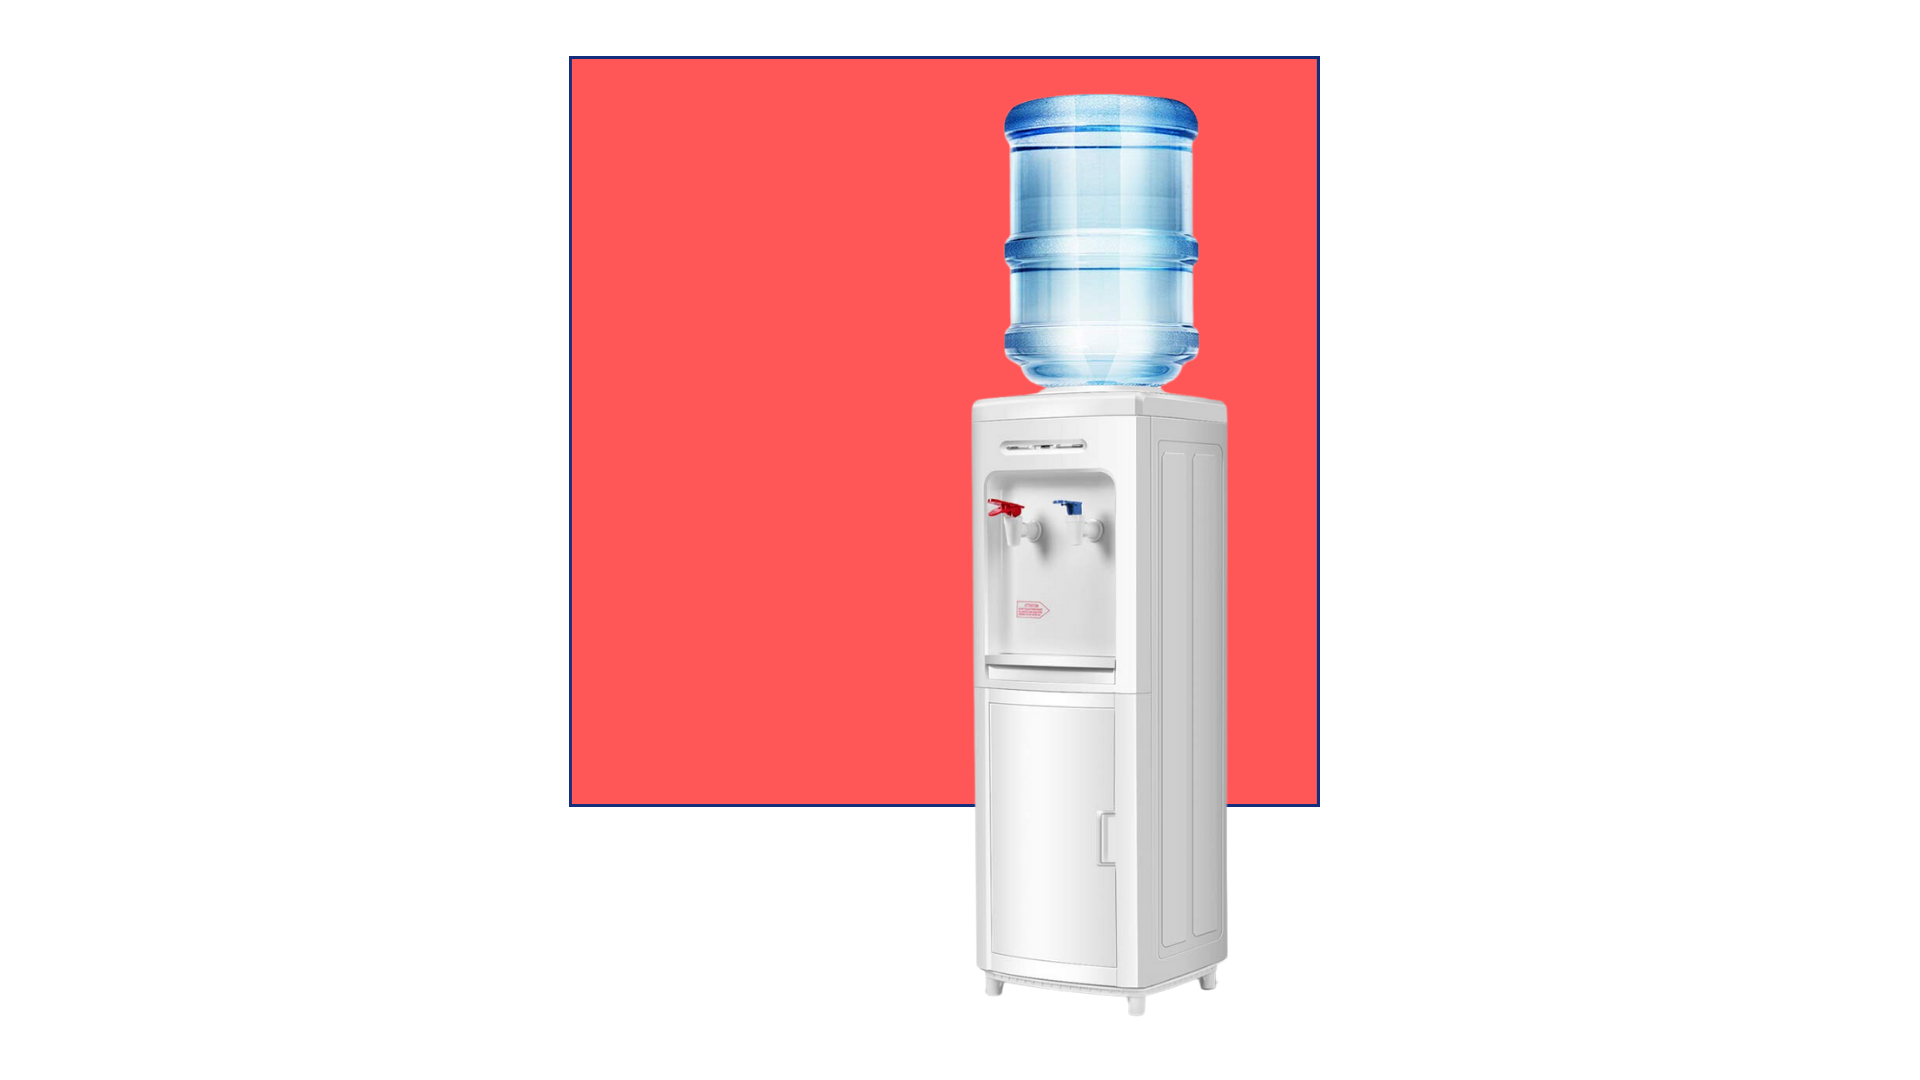 A water cooler stands against an empty blue frame and an empty reddish orange background.